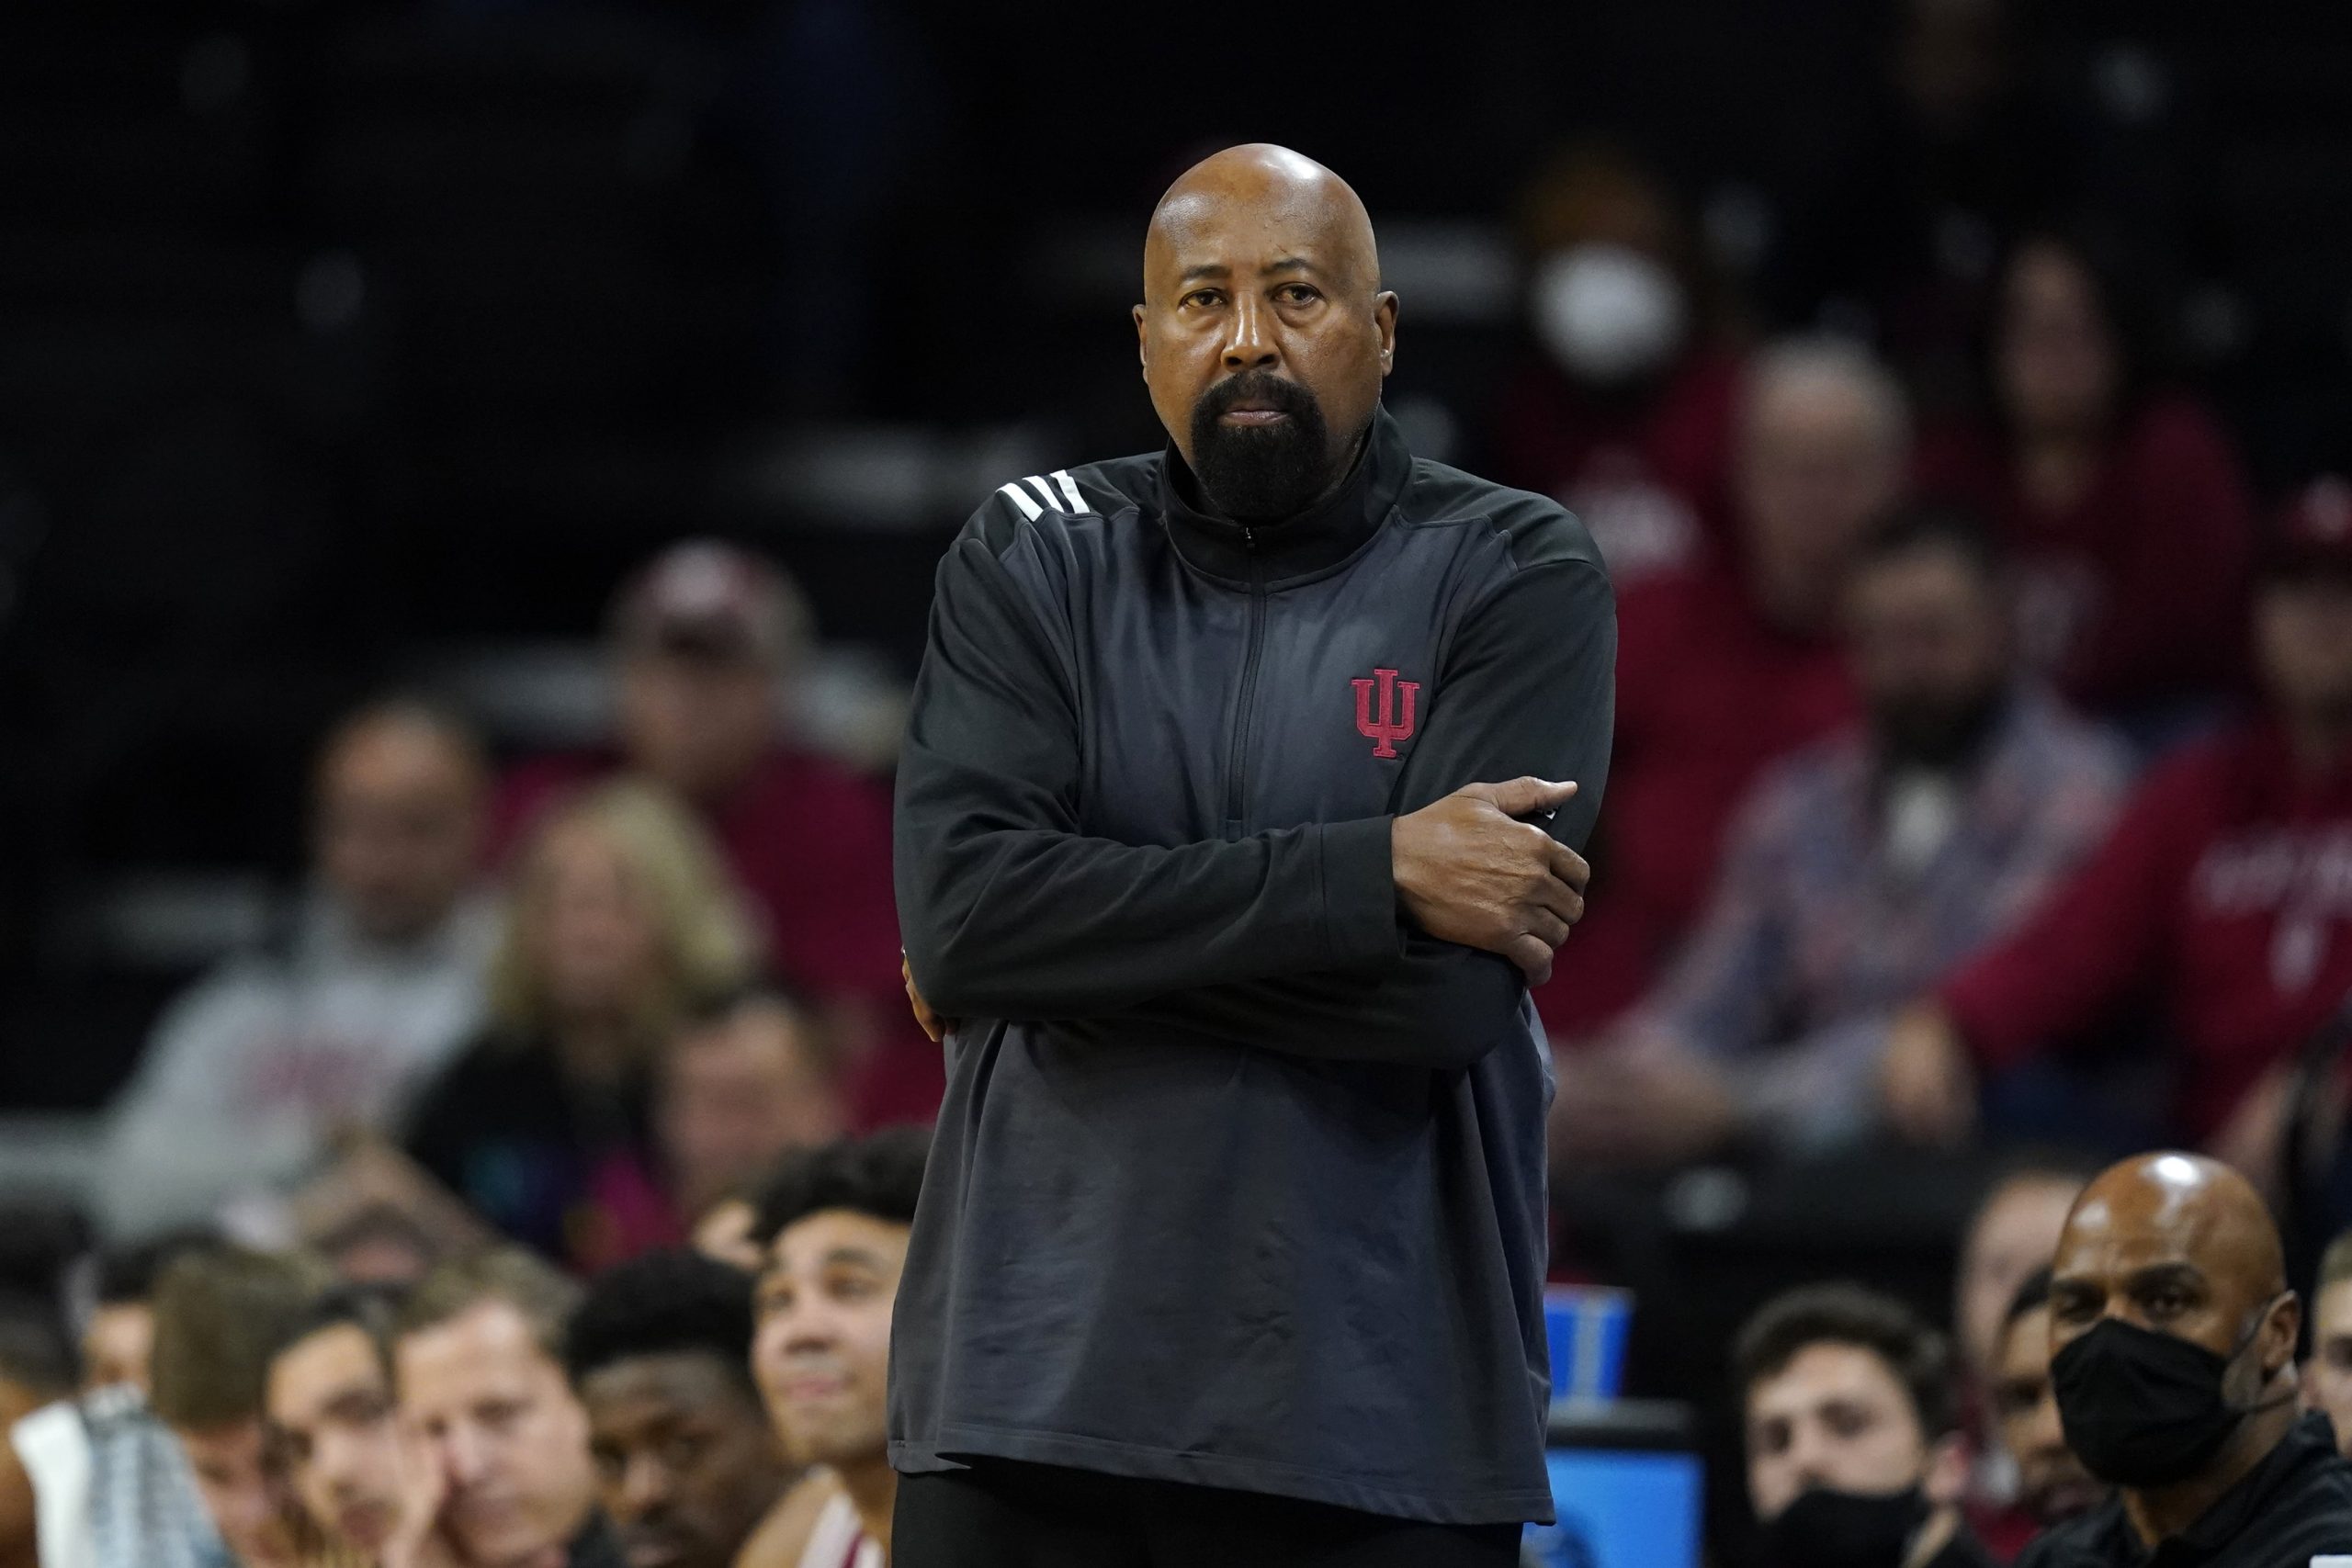 Indiana head coach Mike Woodson watches from the bench during the first half of an NCAA college basketball game against Iowa, Thursday, Jan. 13, 2022, in Iowa City, Iowa